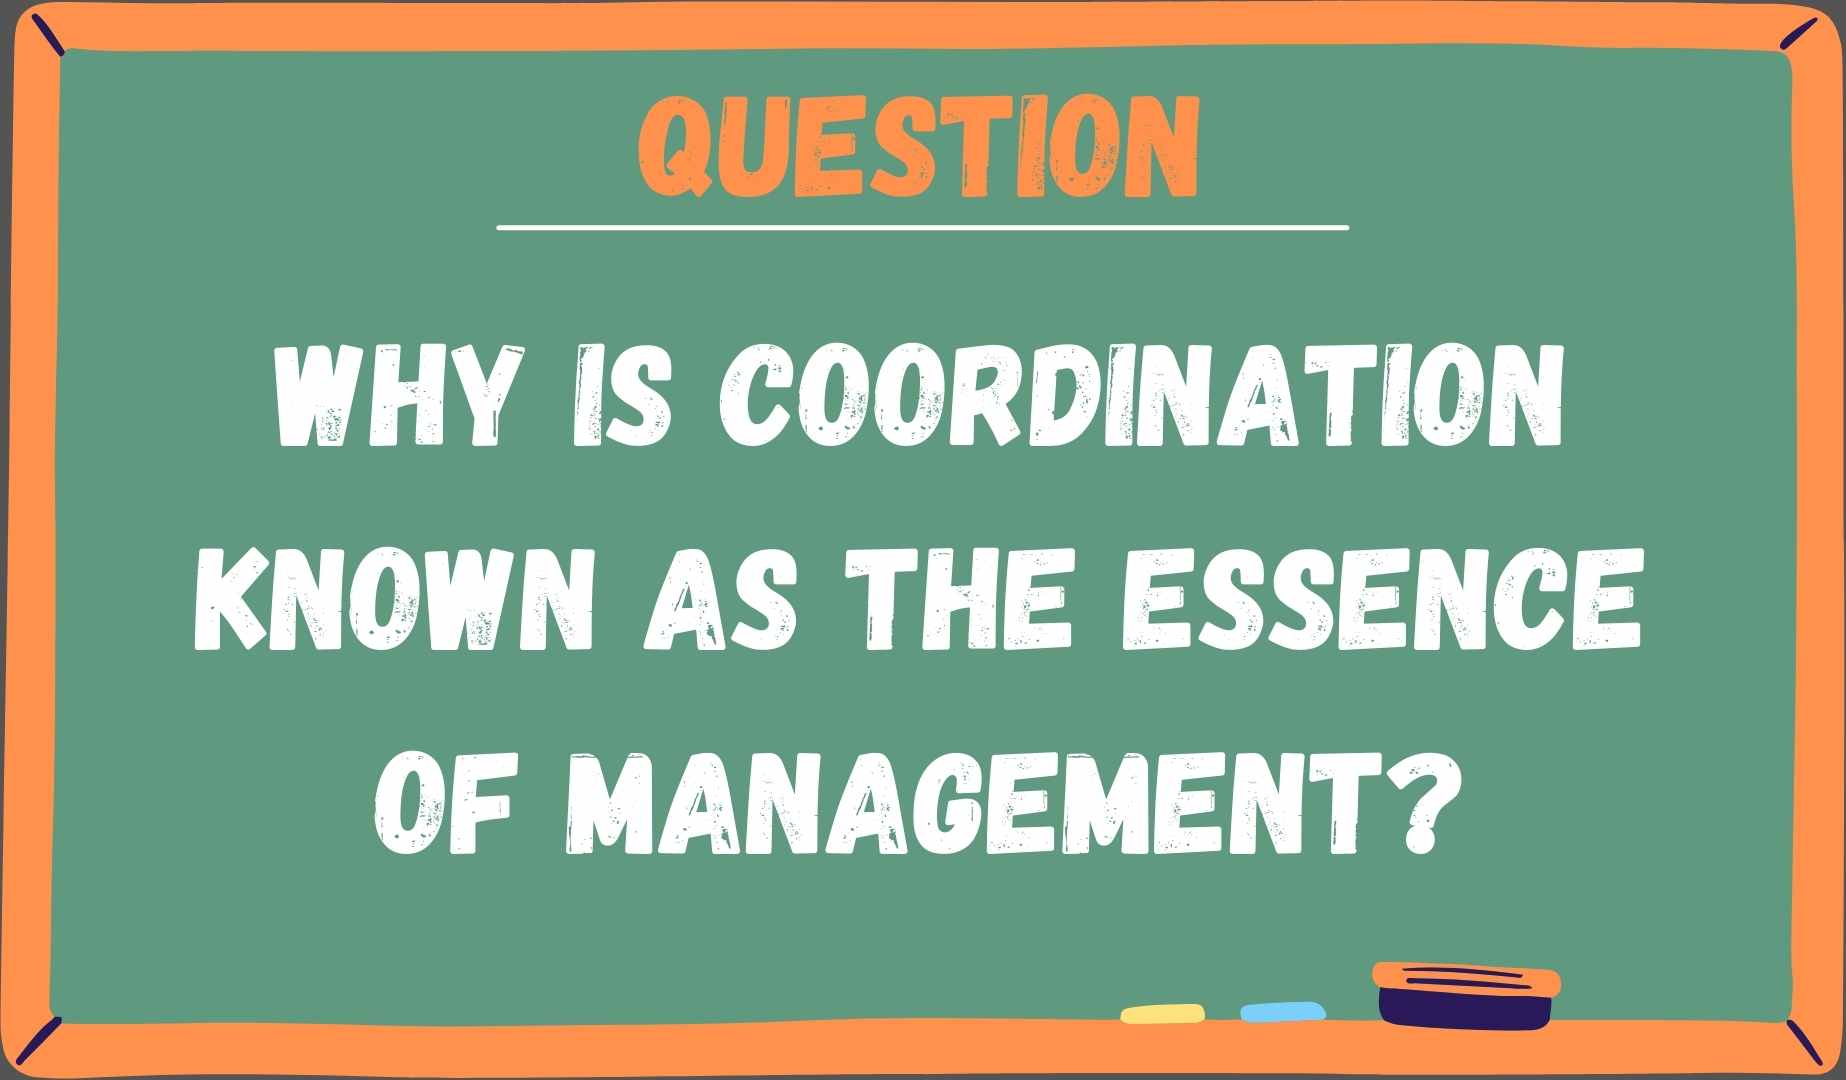 Why is coordination known as the essence of management?